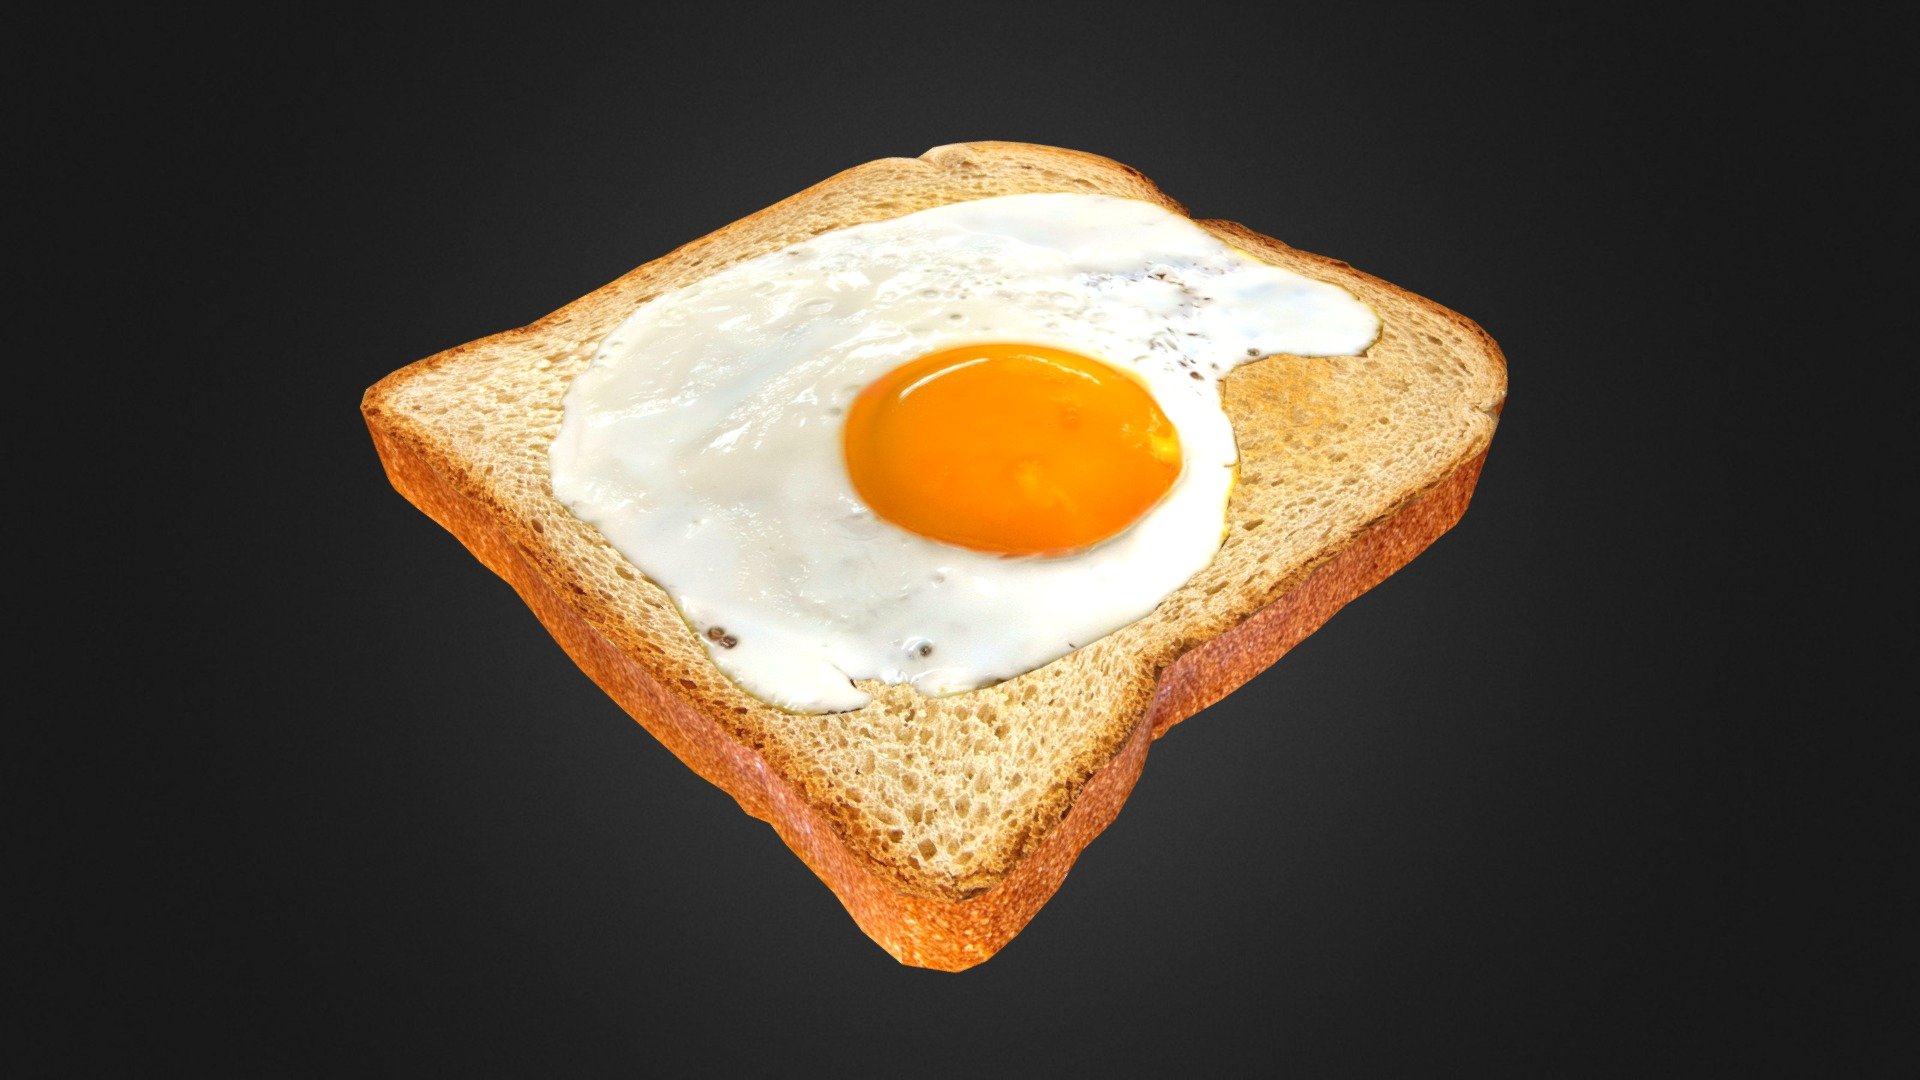 Low poly egg on toast, perfect for games. Comes with bump and normal maps 3d model